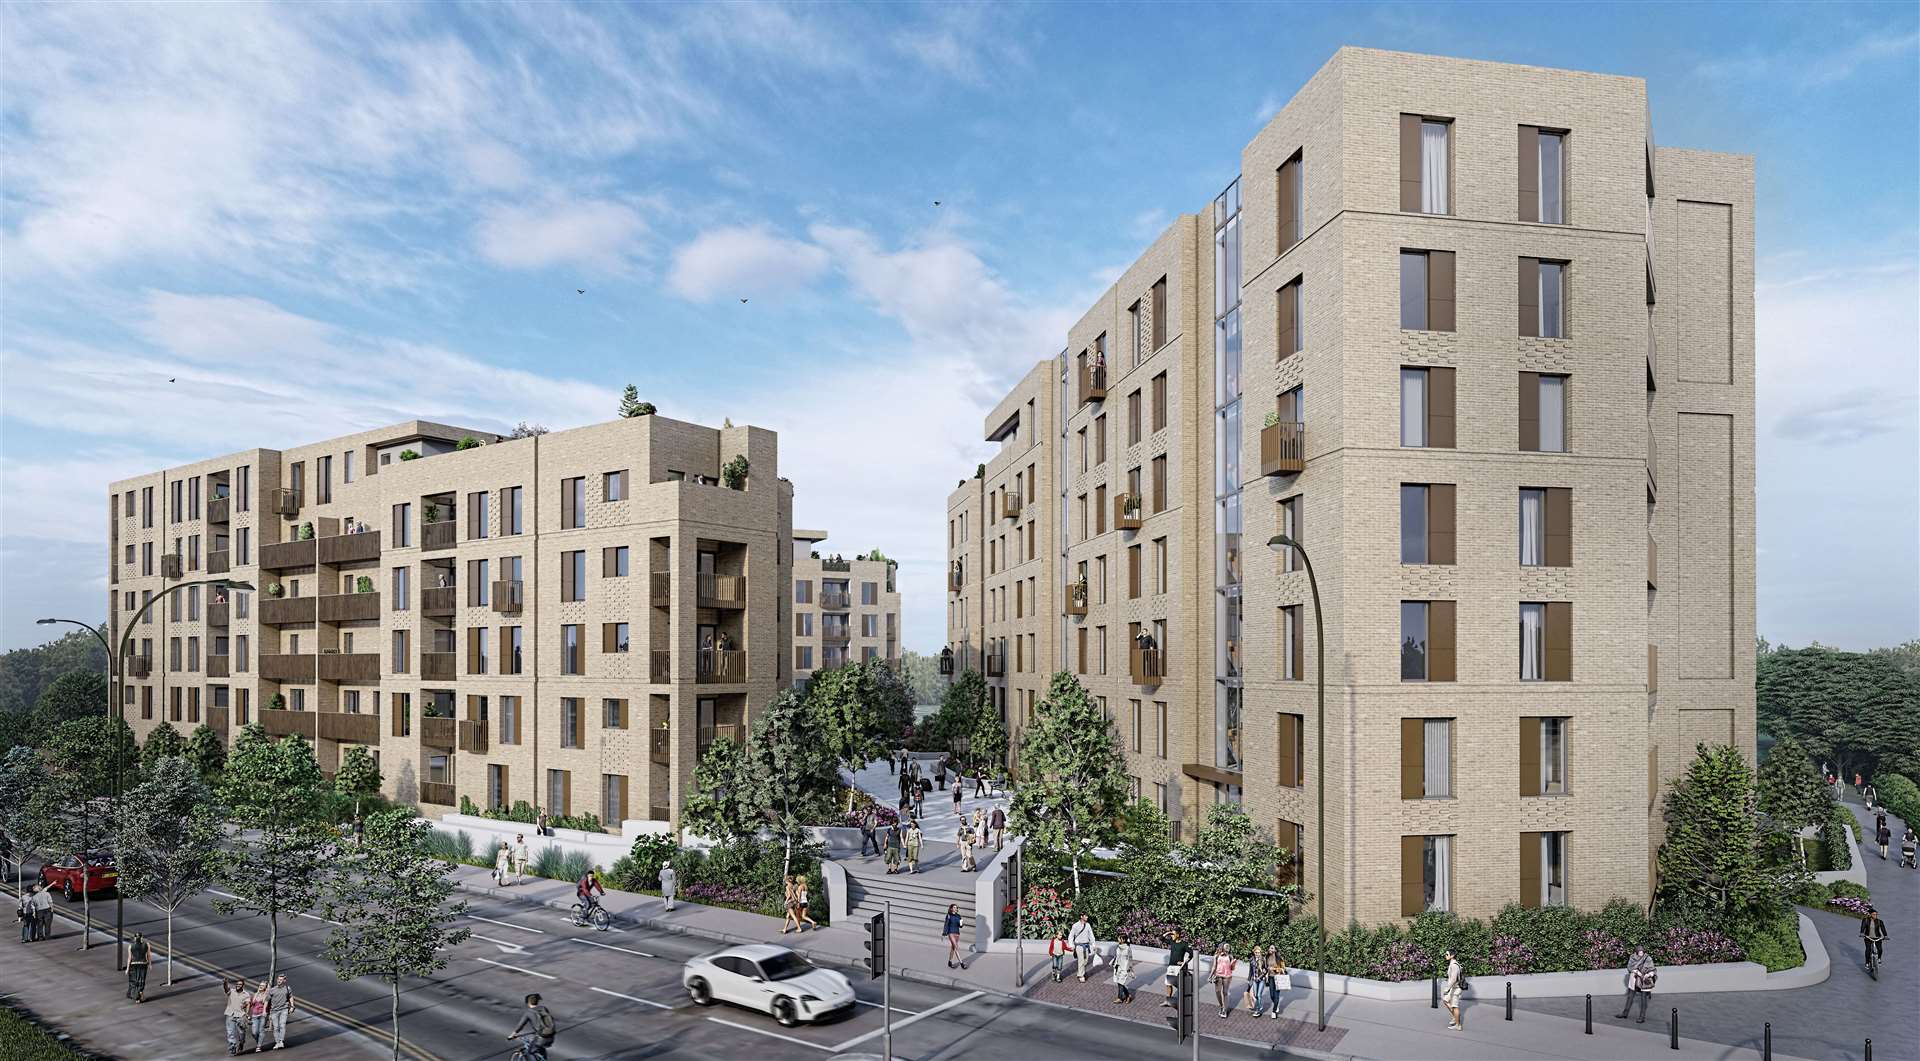 The first phase of the development - called 'The Triangle' - will cost £35m